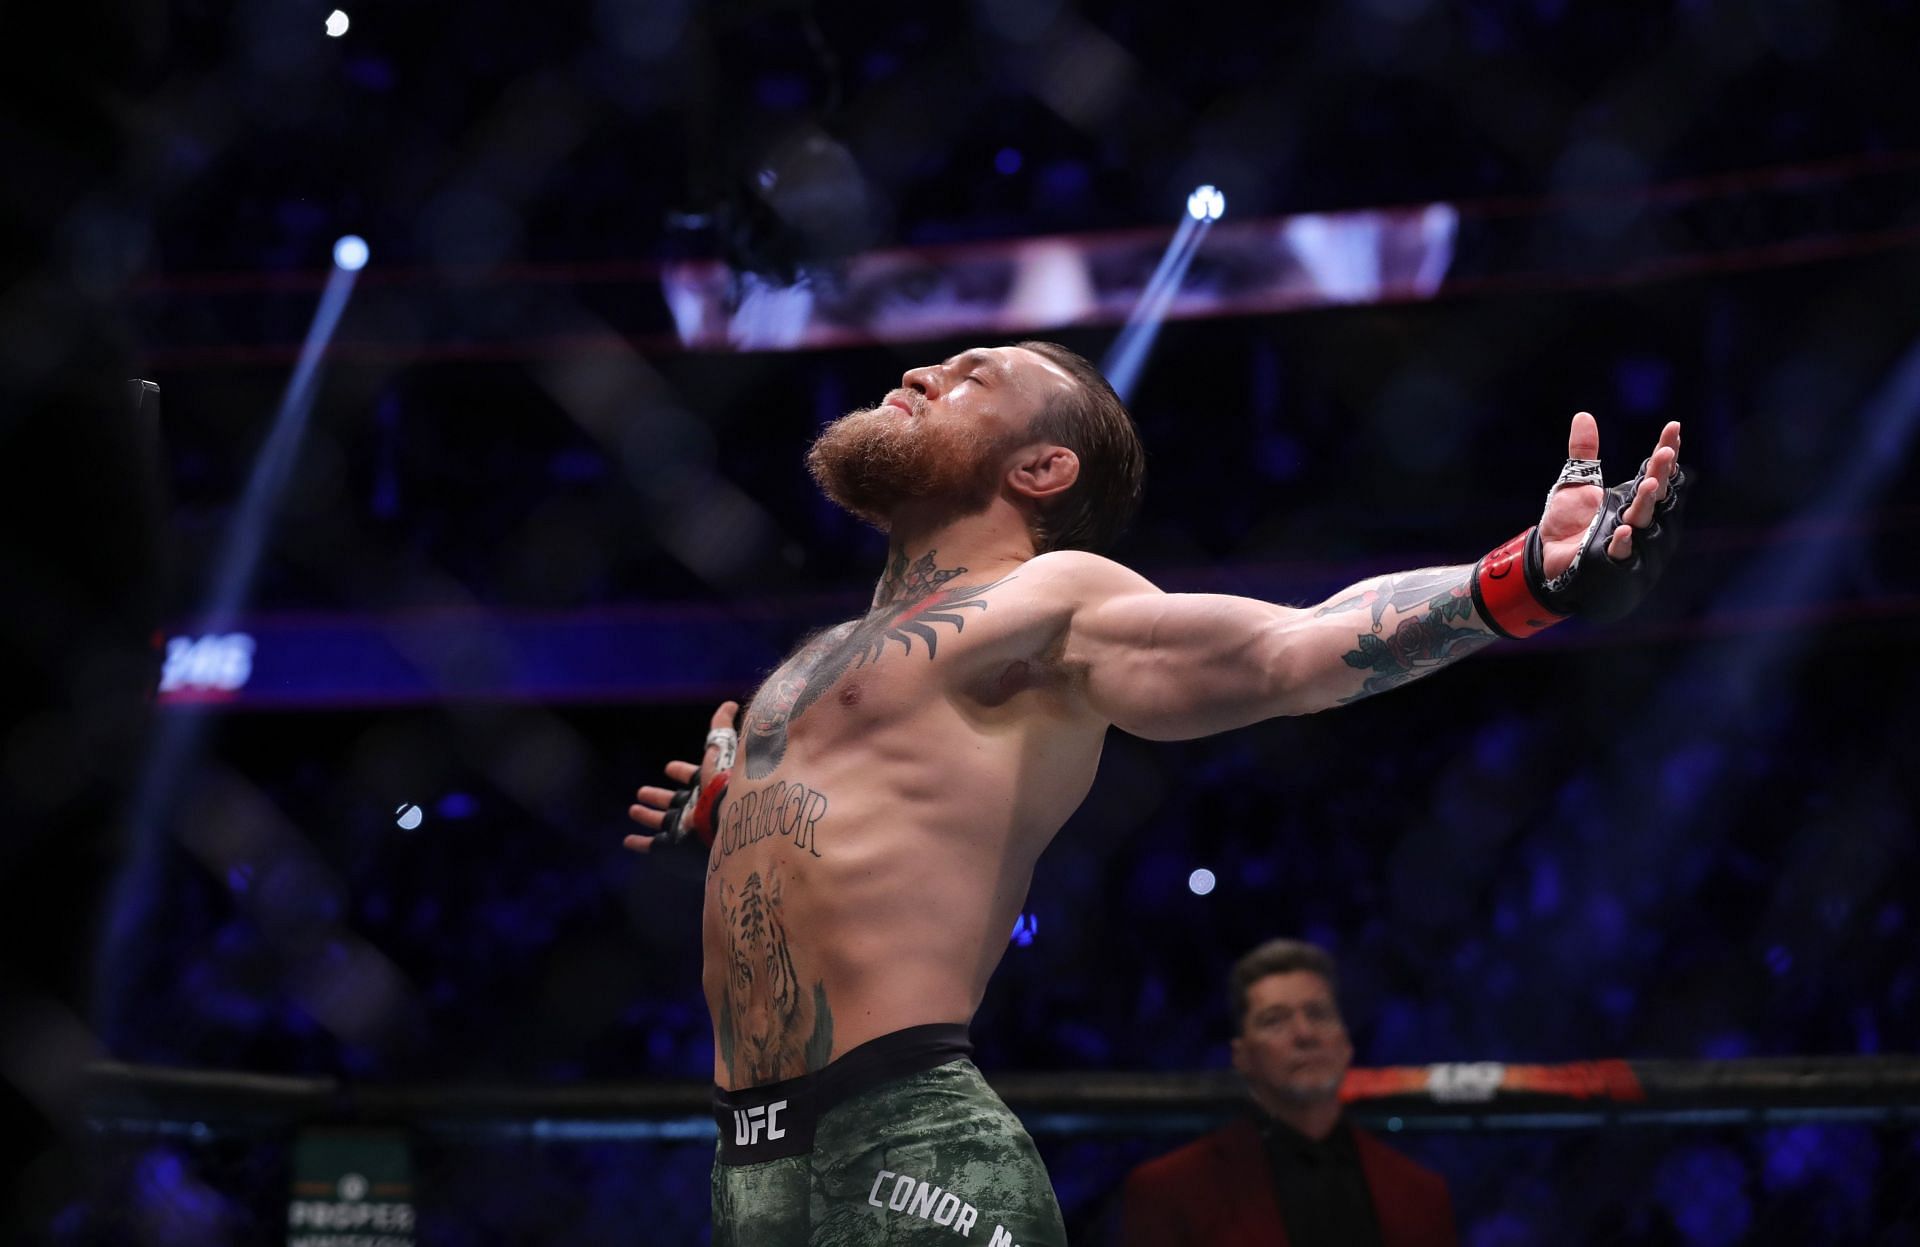 While some fans see Conor McGregor as past his best, it&rsquo;s impossible not to respect his accomplishments.